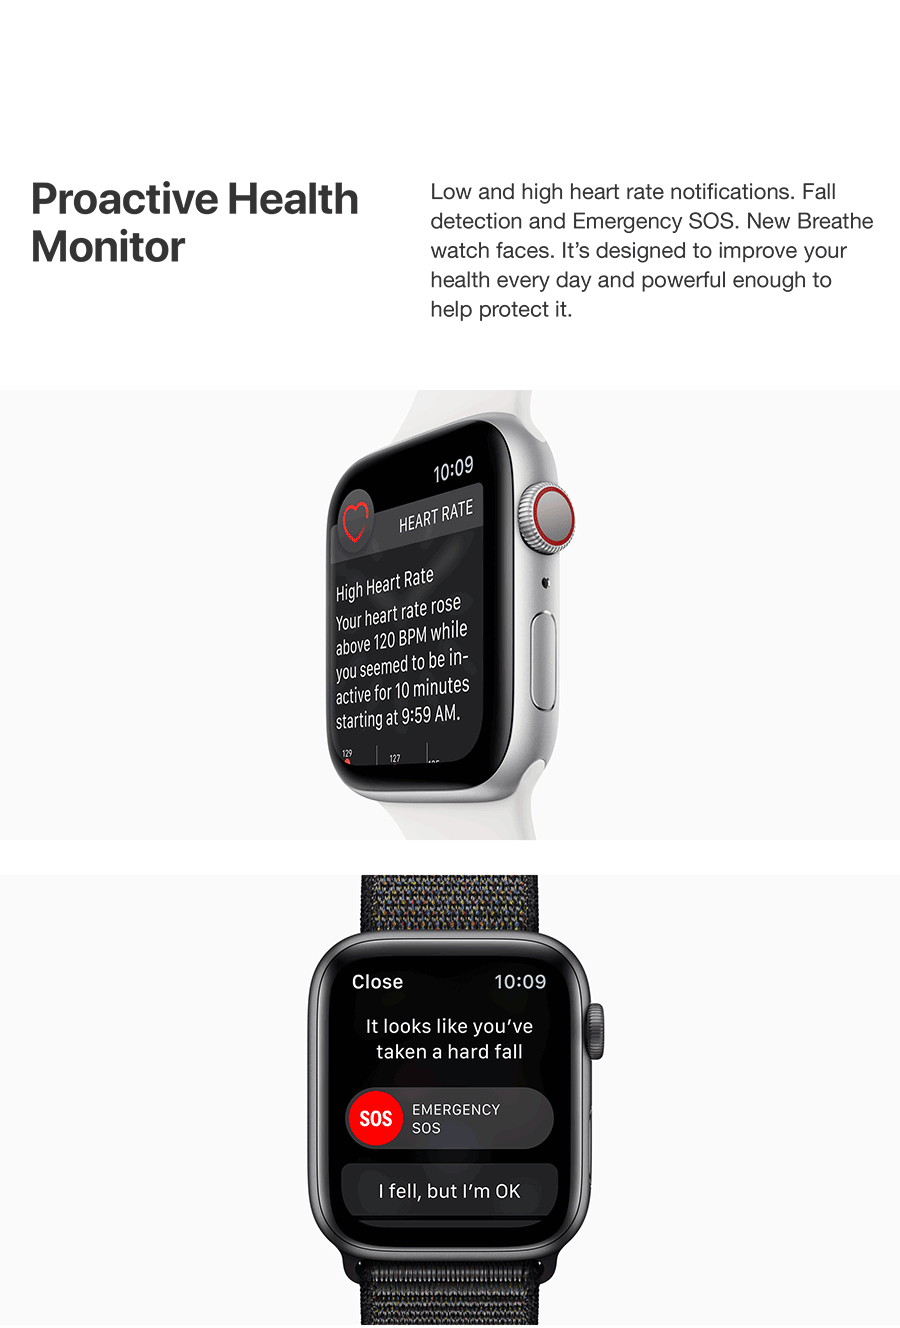 Apple Watch Series 4 Features